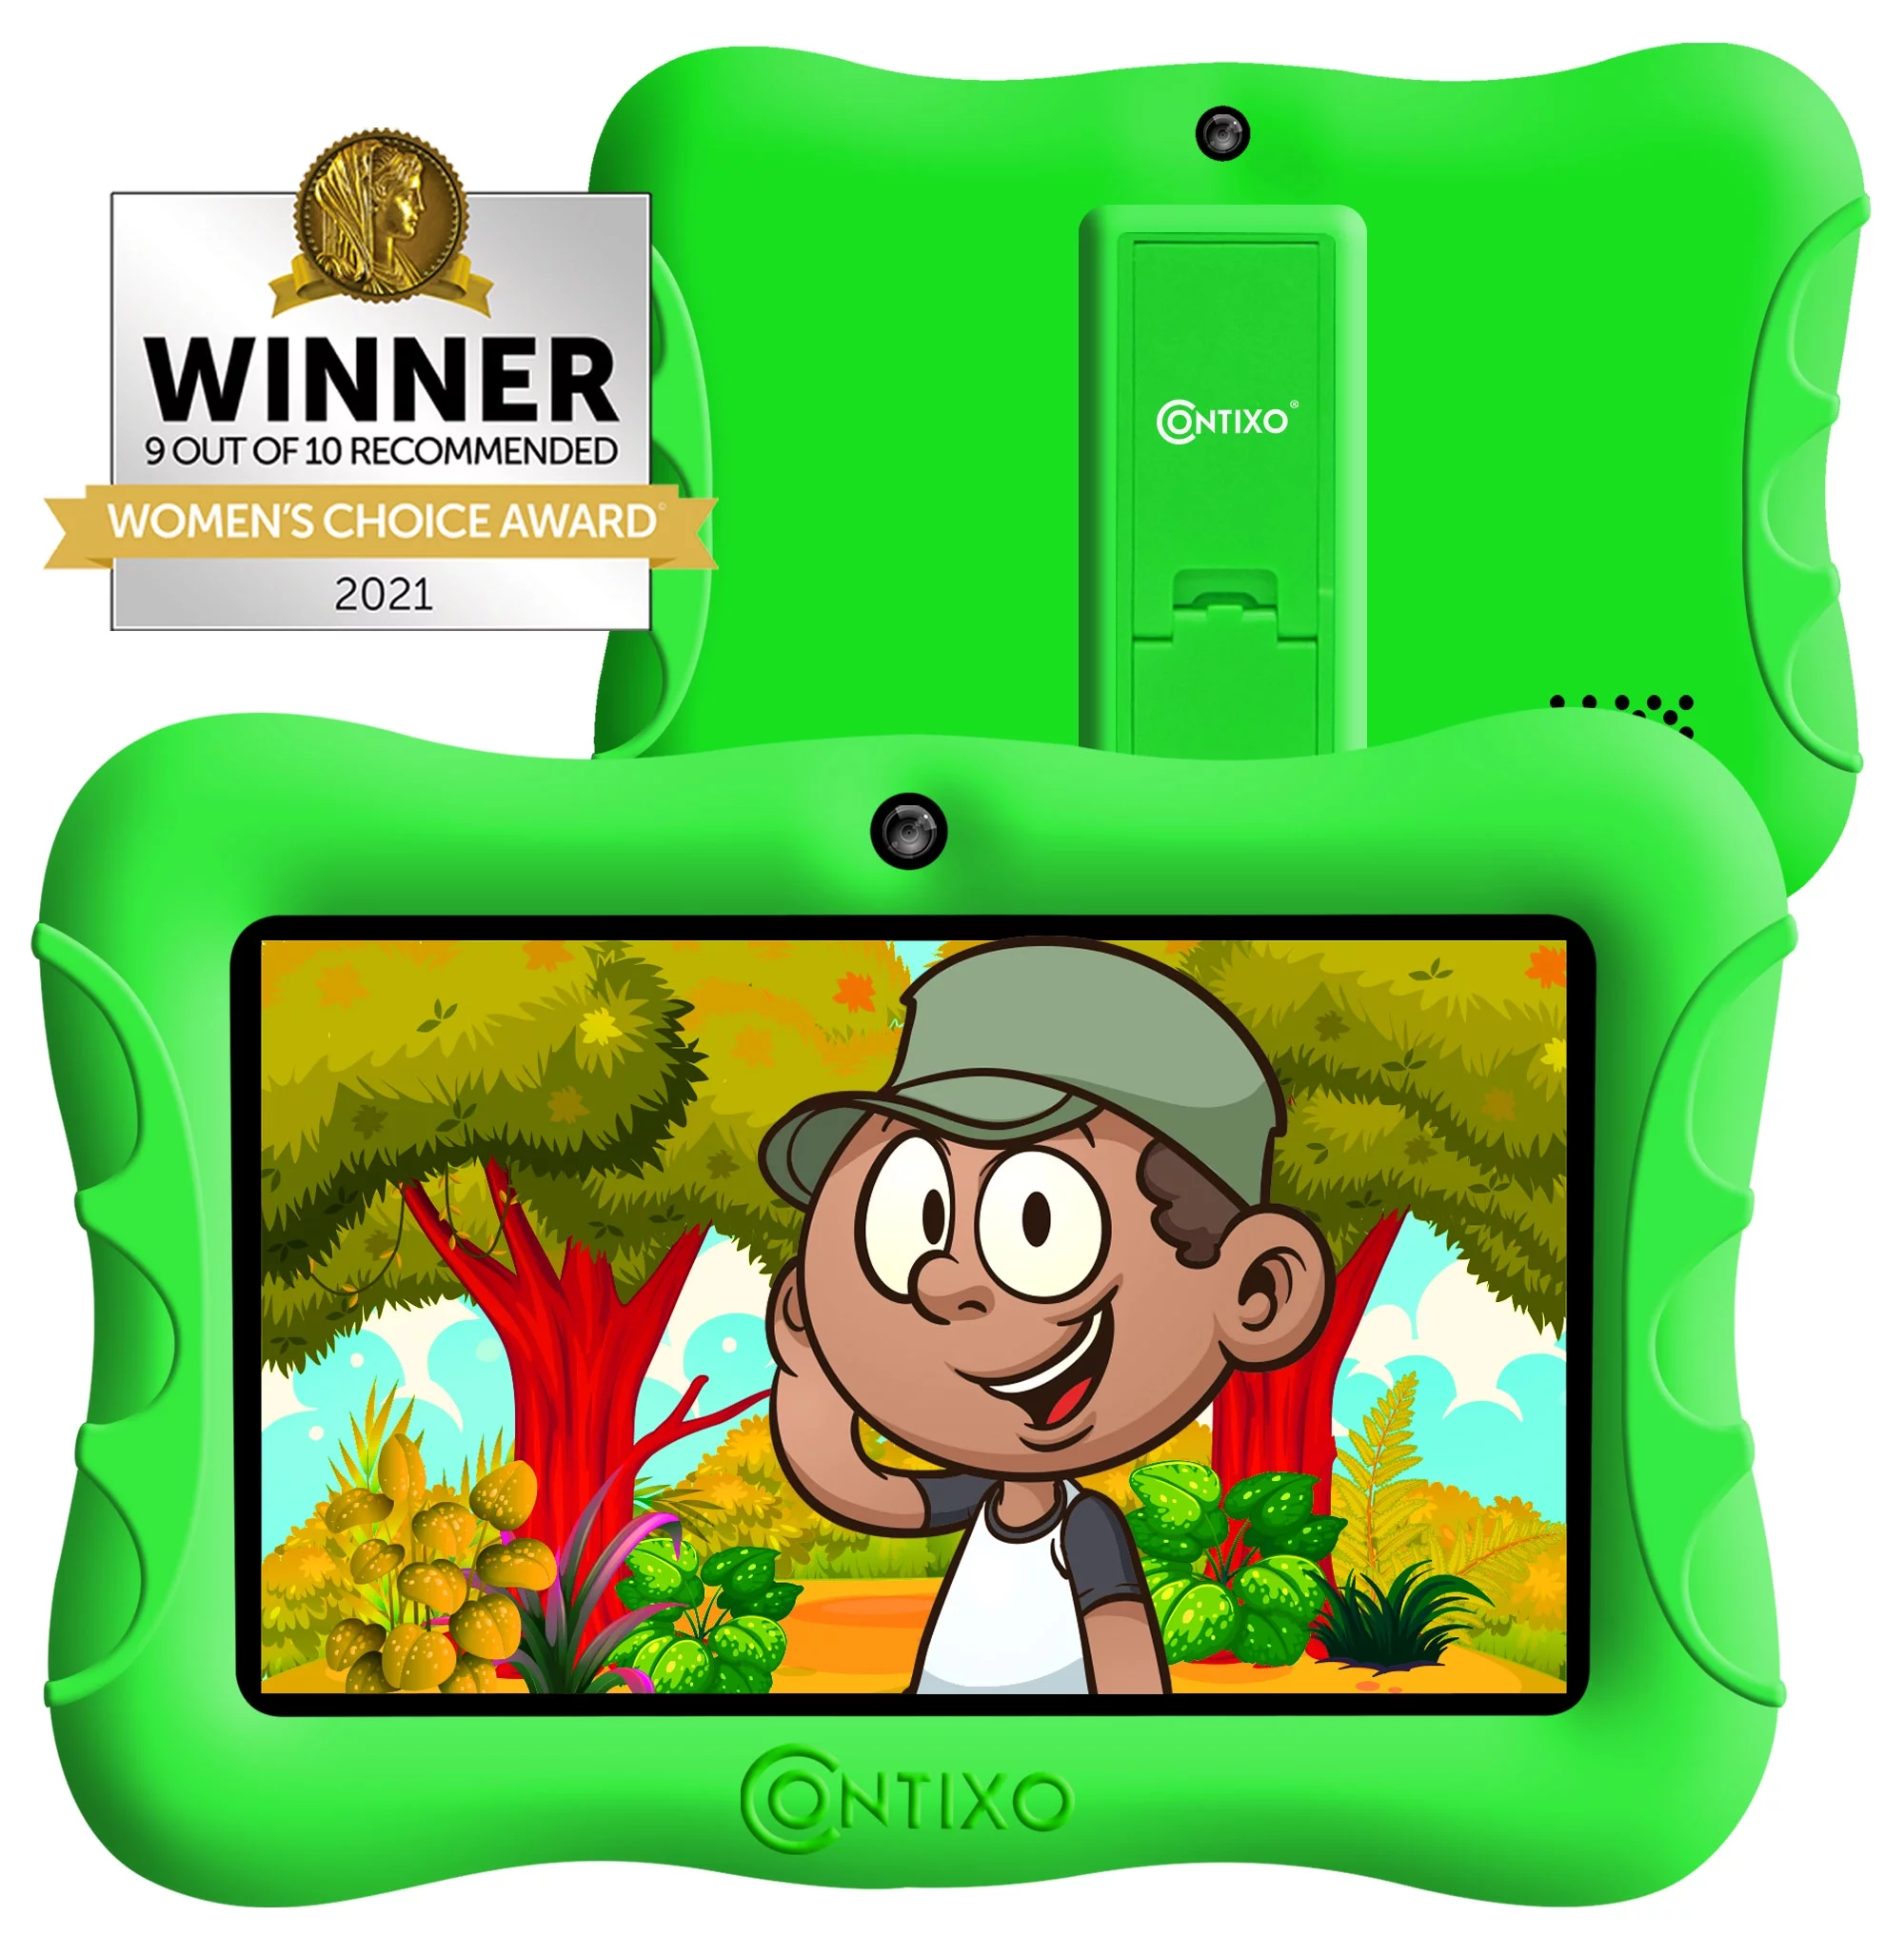 Contixo A3 15.6" Educational Touch Screen Android 11 HD 128GB Tablet Featuring 80 Disney eBooks Videos with 13MP Camera & Built-in 10W Speaker